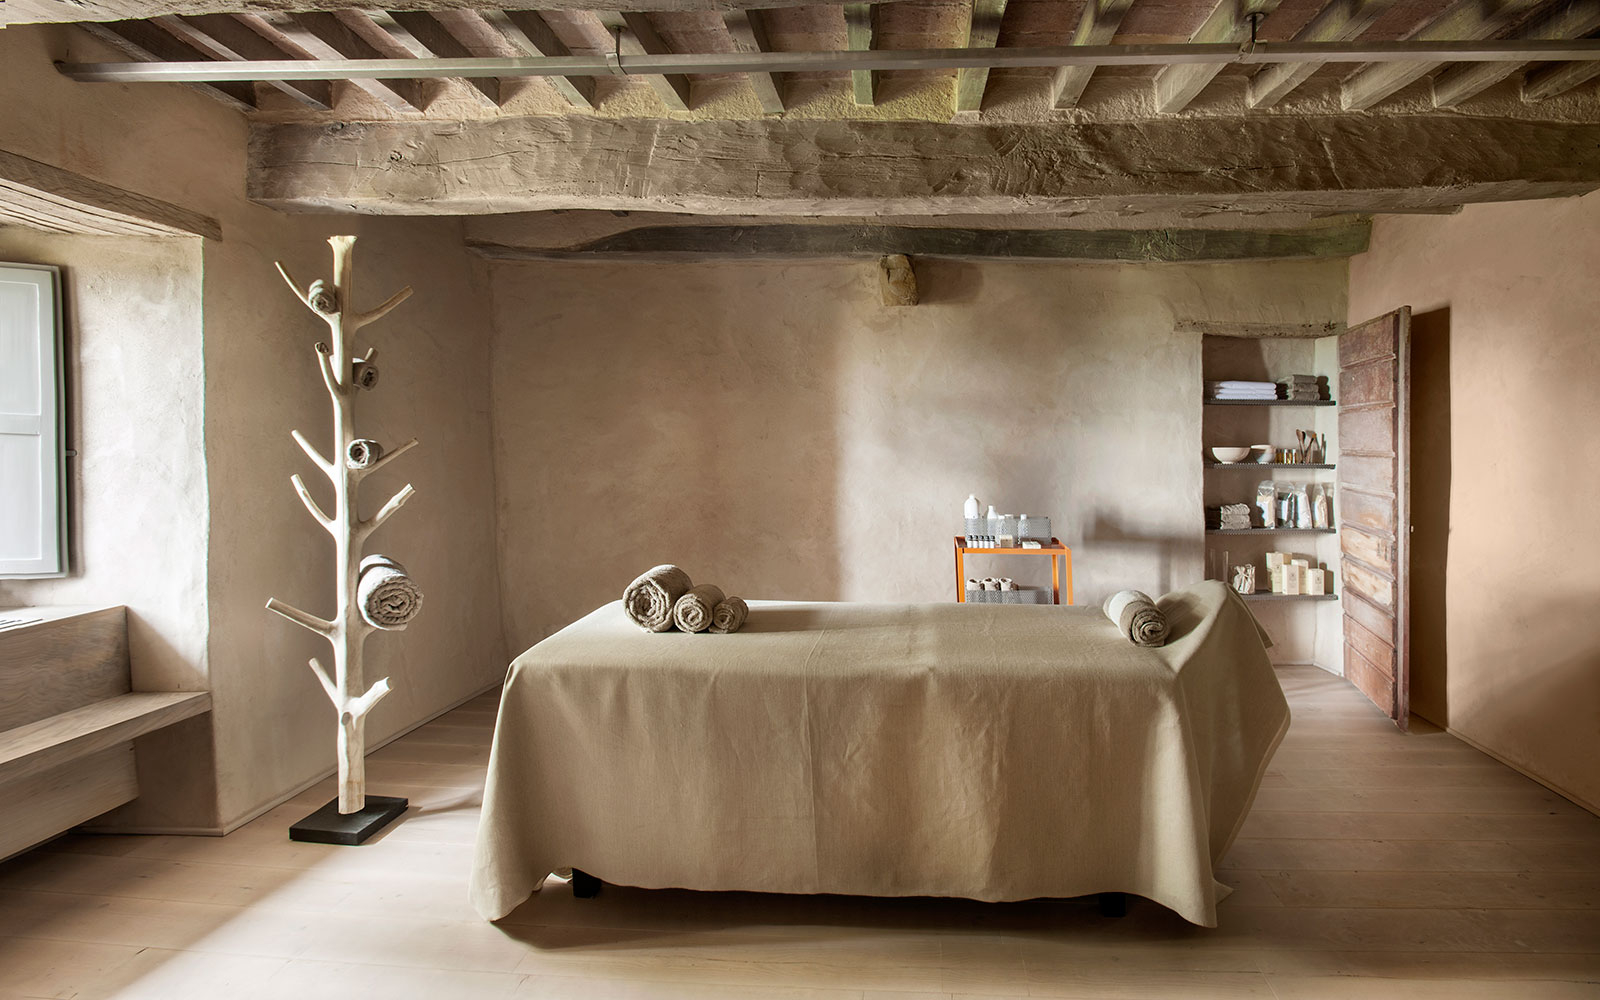 Tuscany’s Enticing New Spa is a Minimalist Paradise With Soaking Tubs